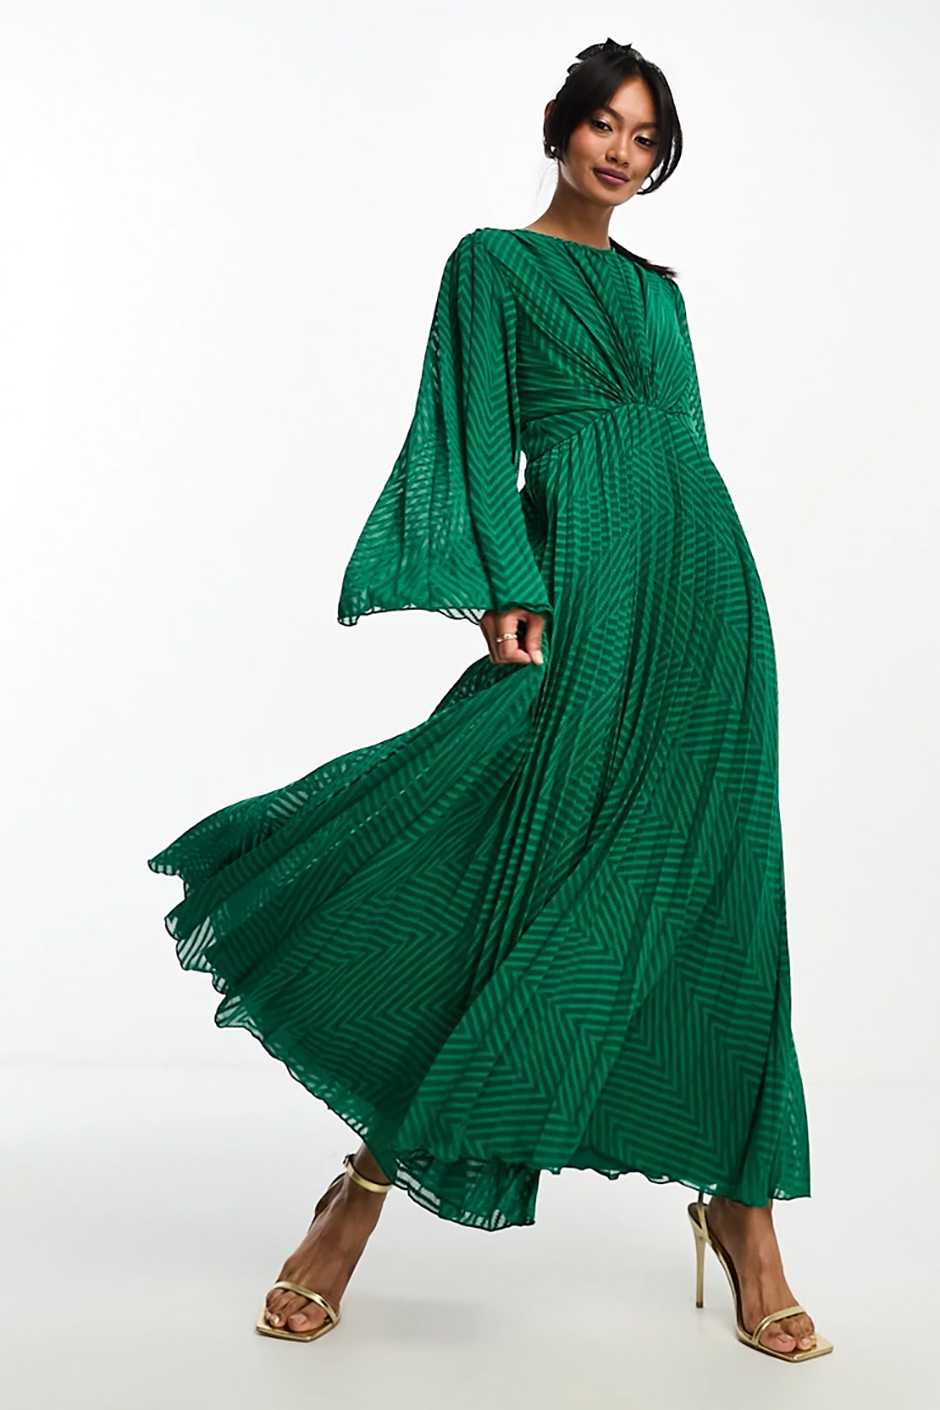 Long sleeve green winter wedding dress from ASOS with pleated design and fluted sleeves